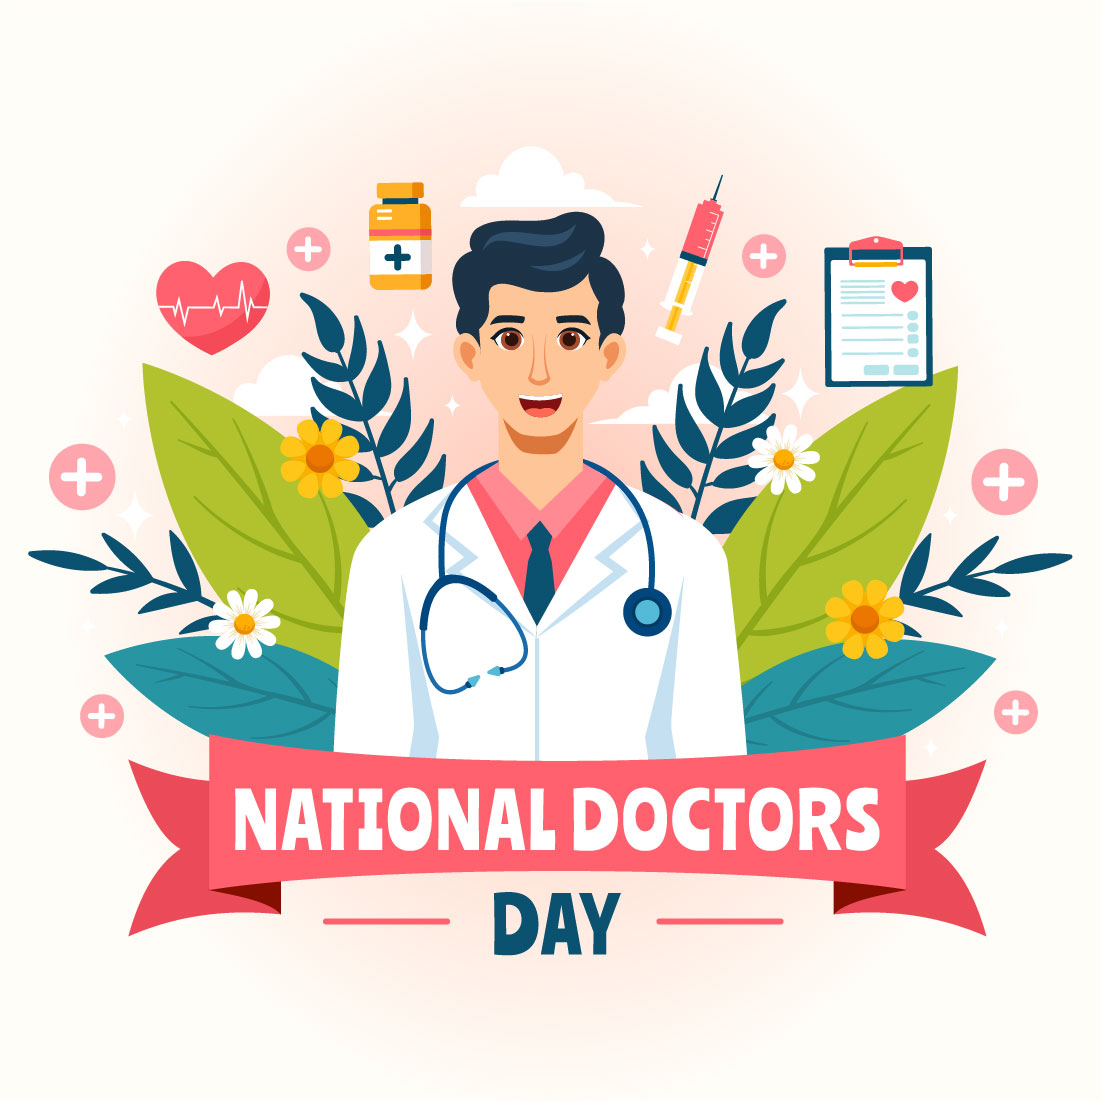 12 National Doctors Day Illustration preview image.